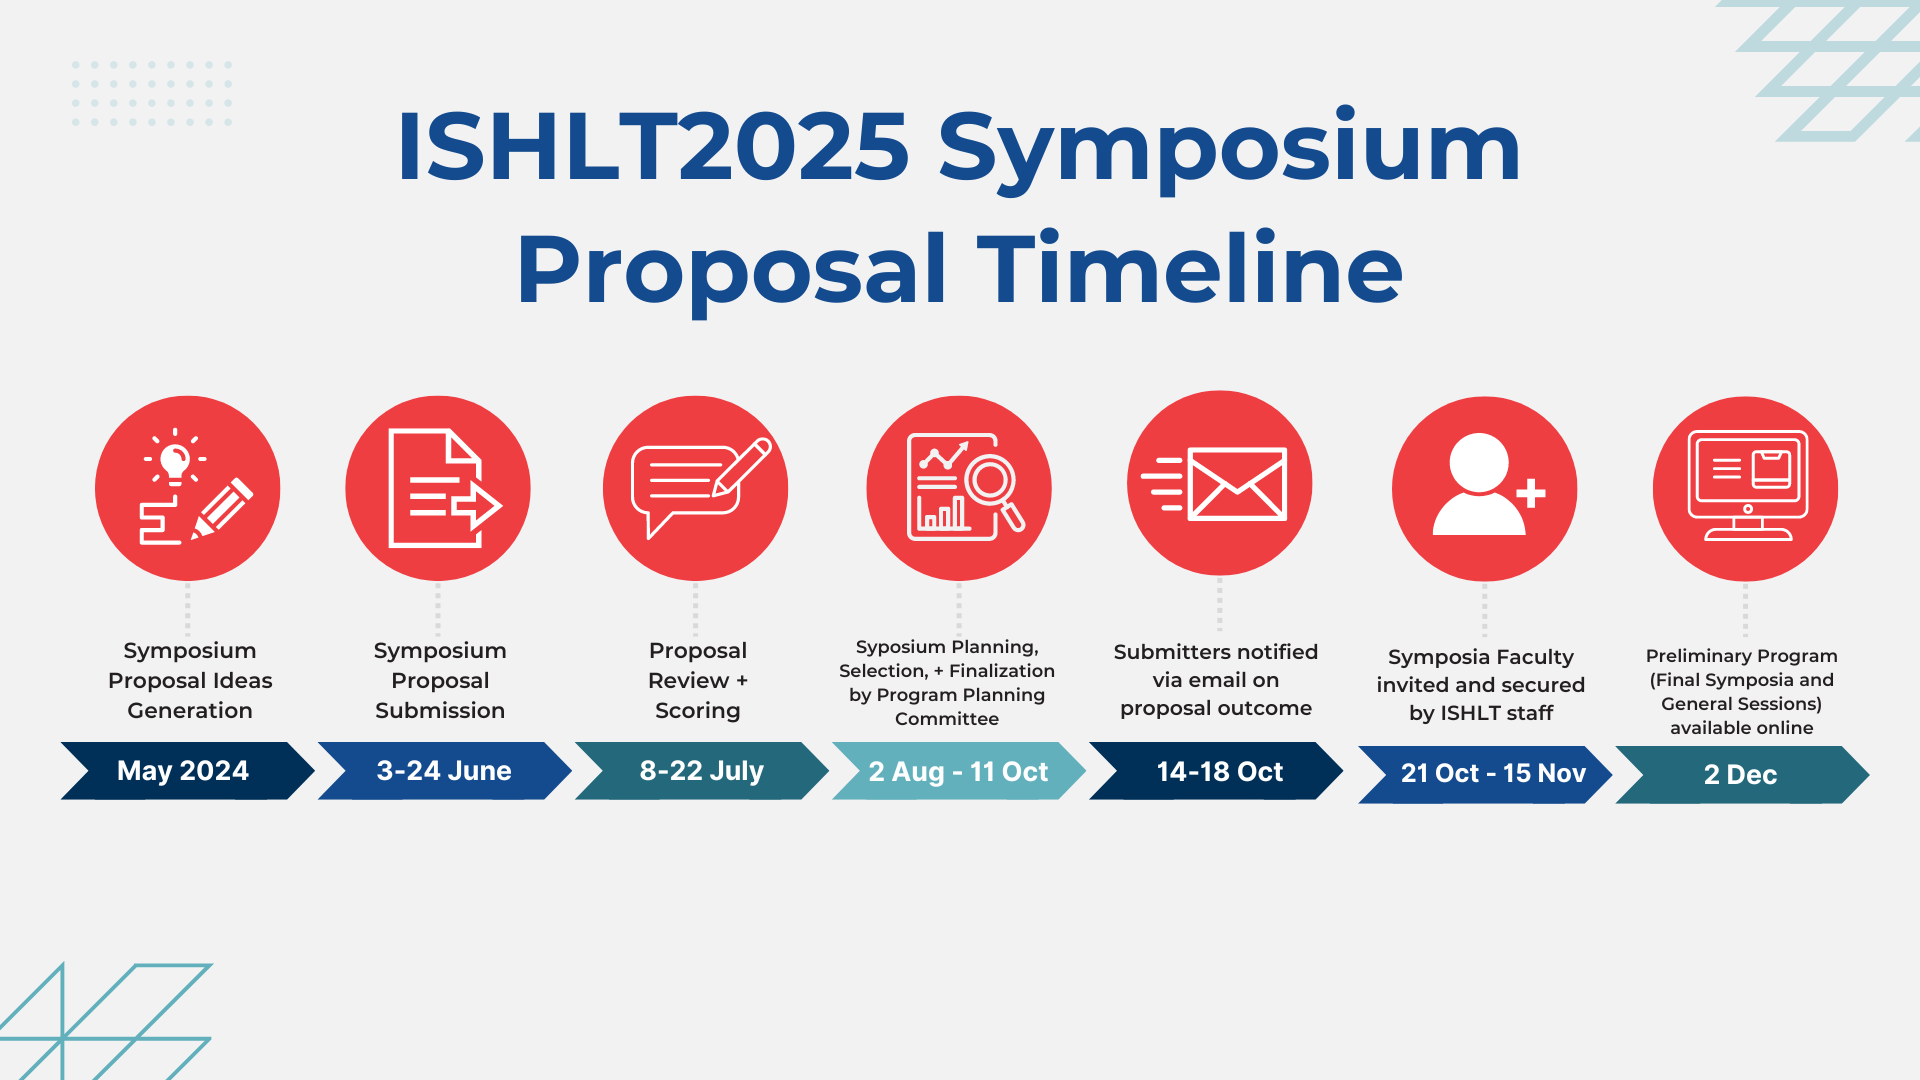 Timeline for ISHLT2025 Symposia Submission and Selection